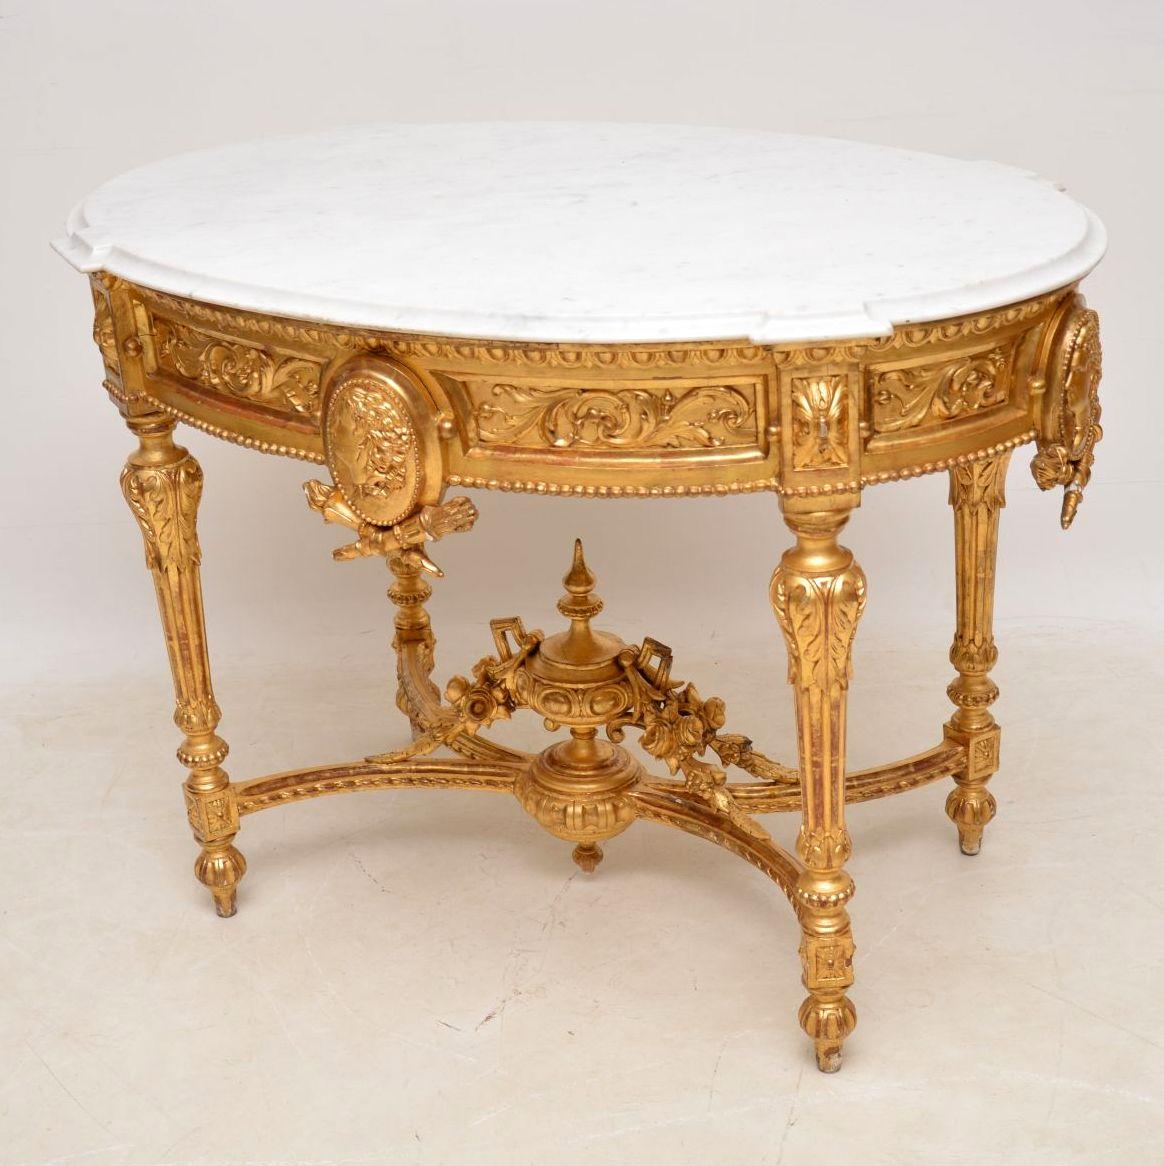 19th Century Antique French Marble Top Gilt Wood Centre Table